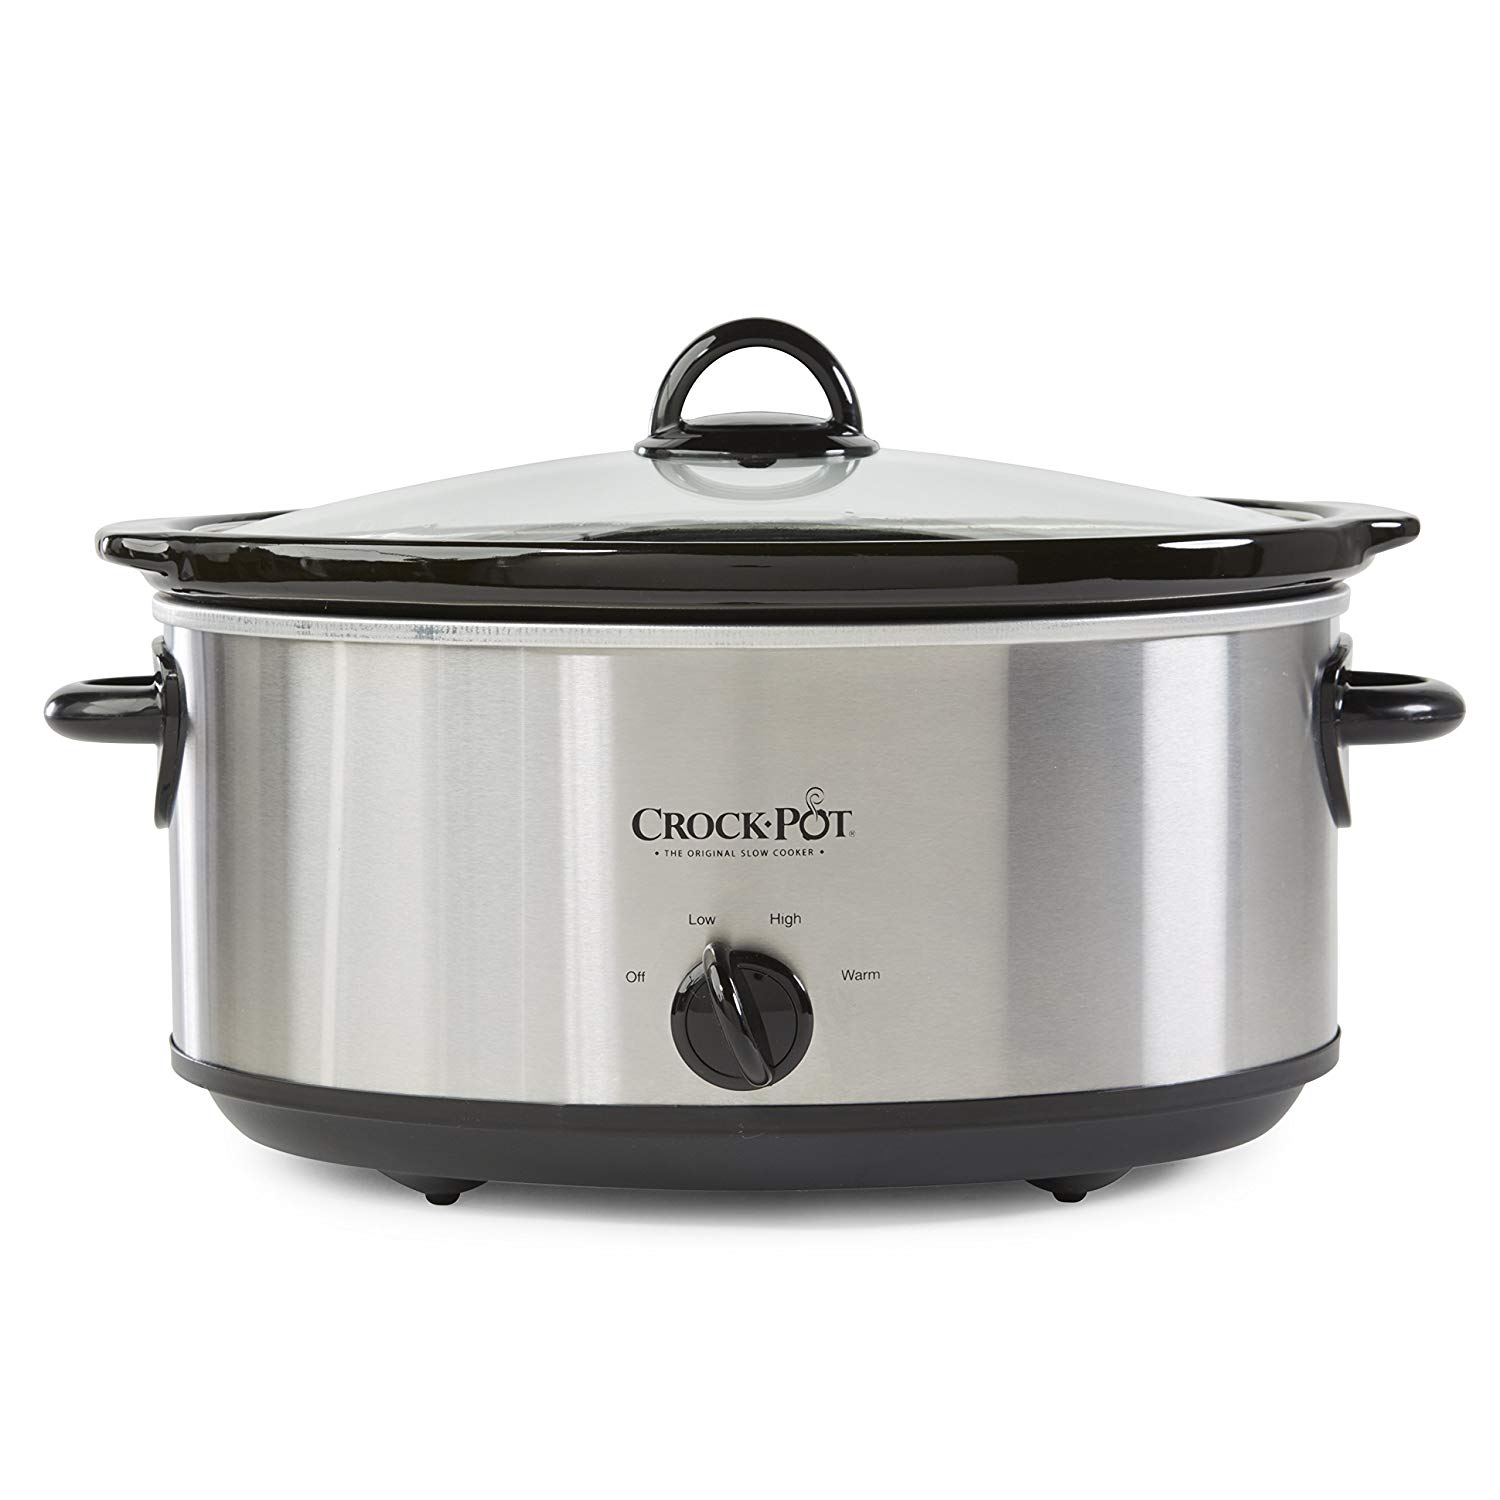  Crock  Pot  7  Quart  Stainless Steel Manual Slow Cooker For 